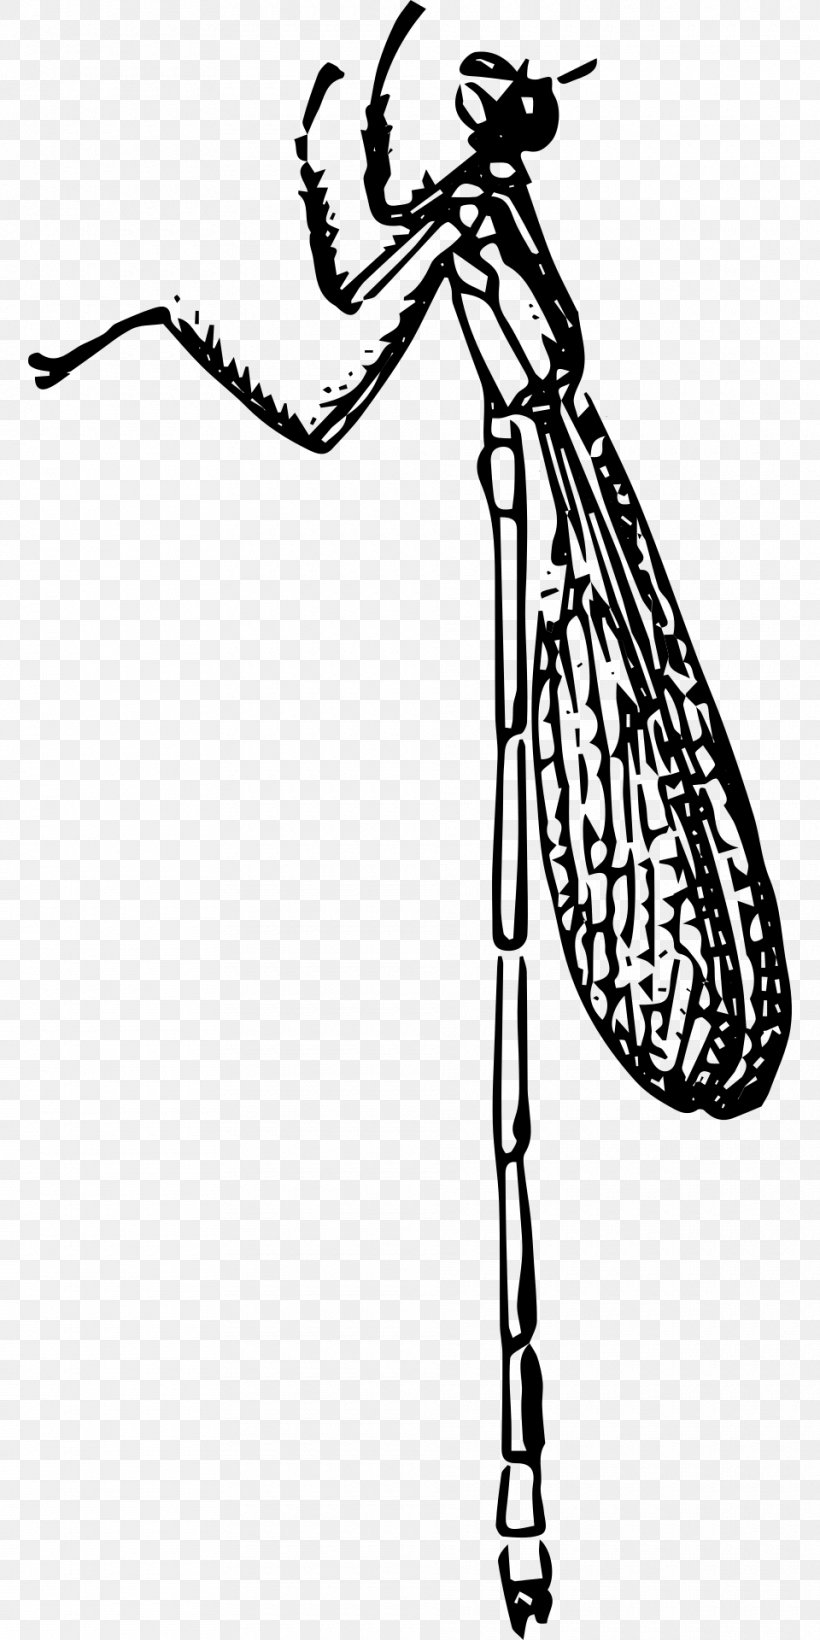 Large Red Damselfly Beetle Clip Art, PNG, 960x1920px, Damselfly, Art, Beetle, Black And White, Cockroach Download Free